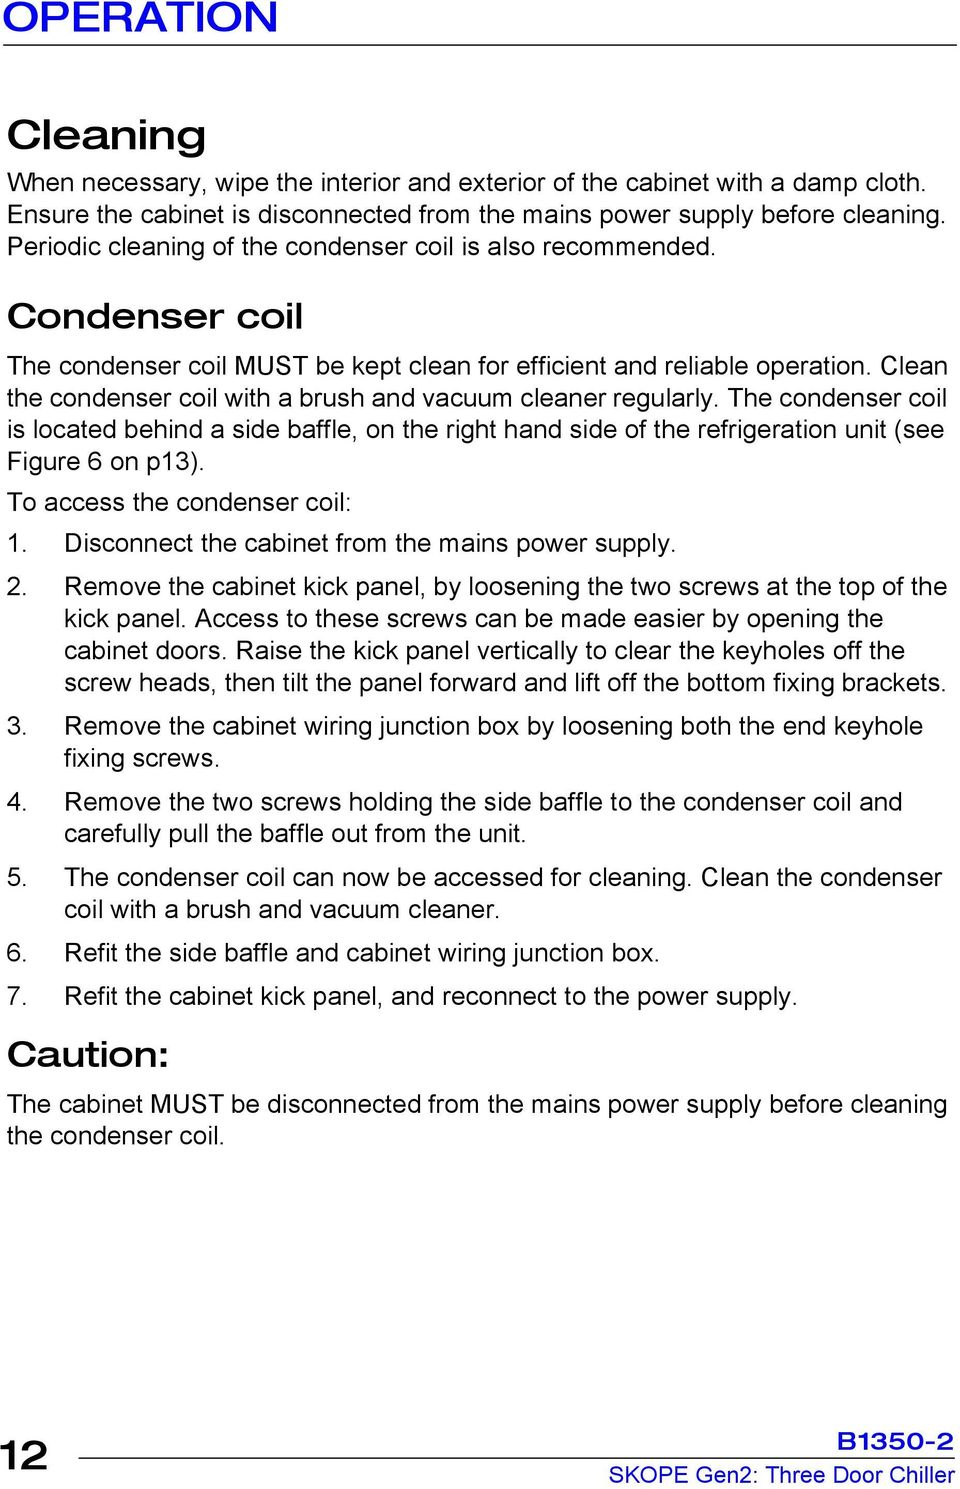 Clean the condenser coil with a brush and vacuum cleaner regularly. The condenser coil is located behind a side baffle, on the right hand side of the refrigeration unit (see Figure 6 on p13).